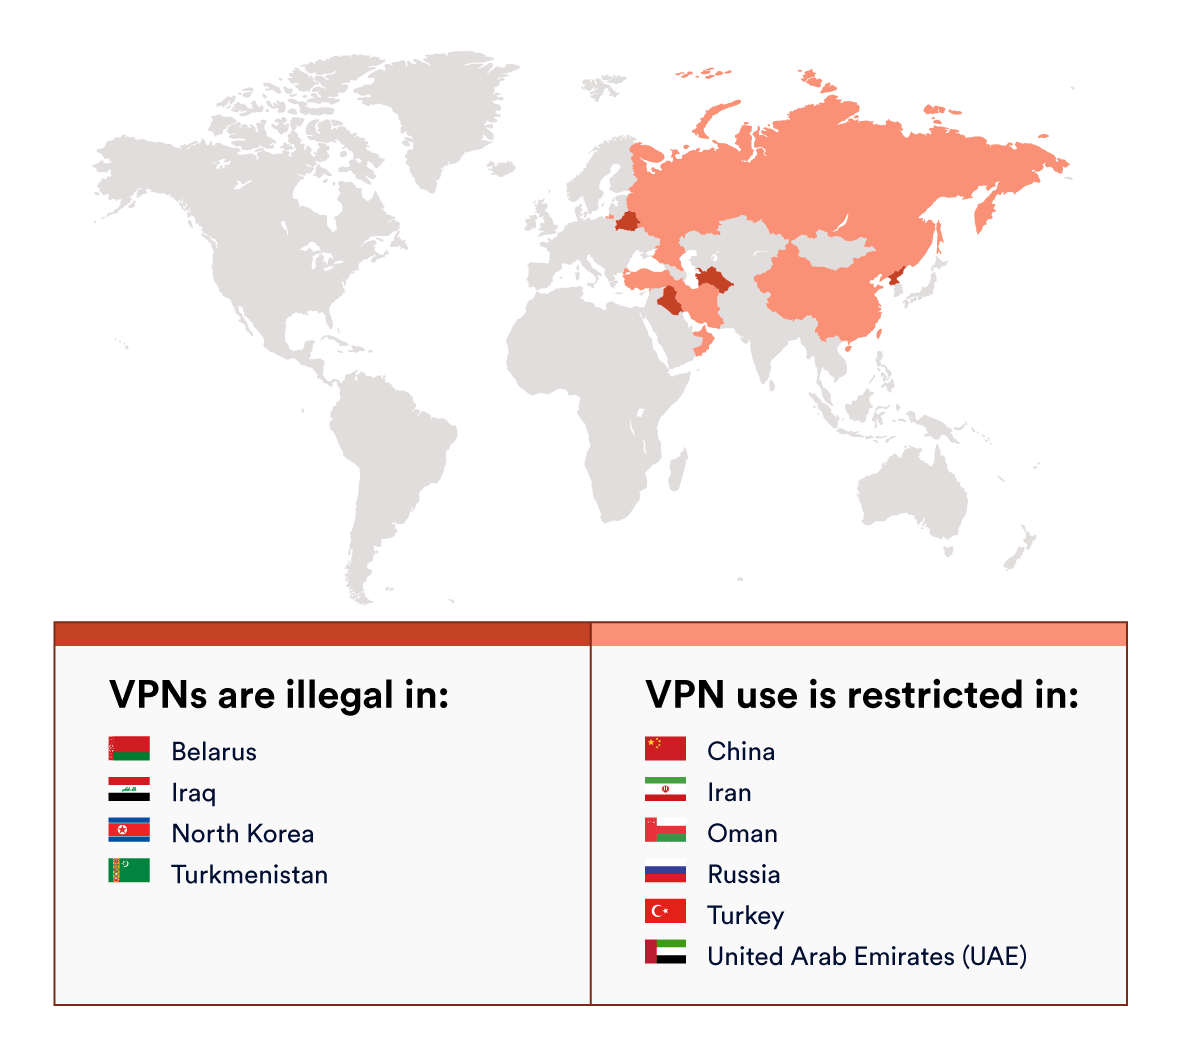 The countries where VPNs are illegal